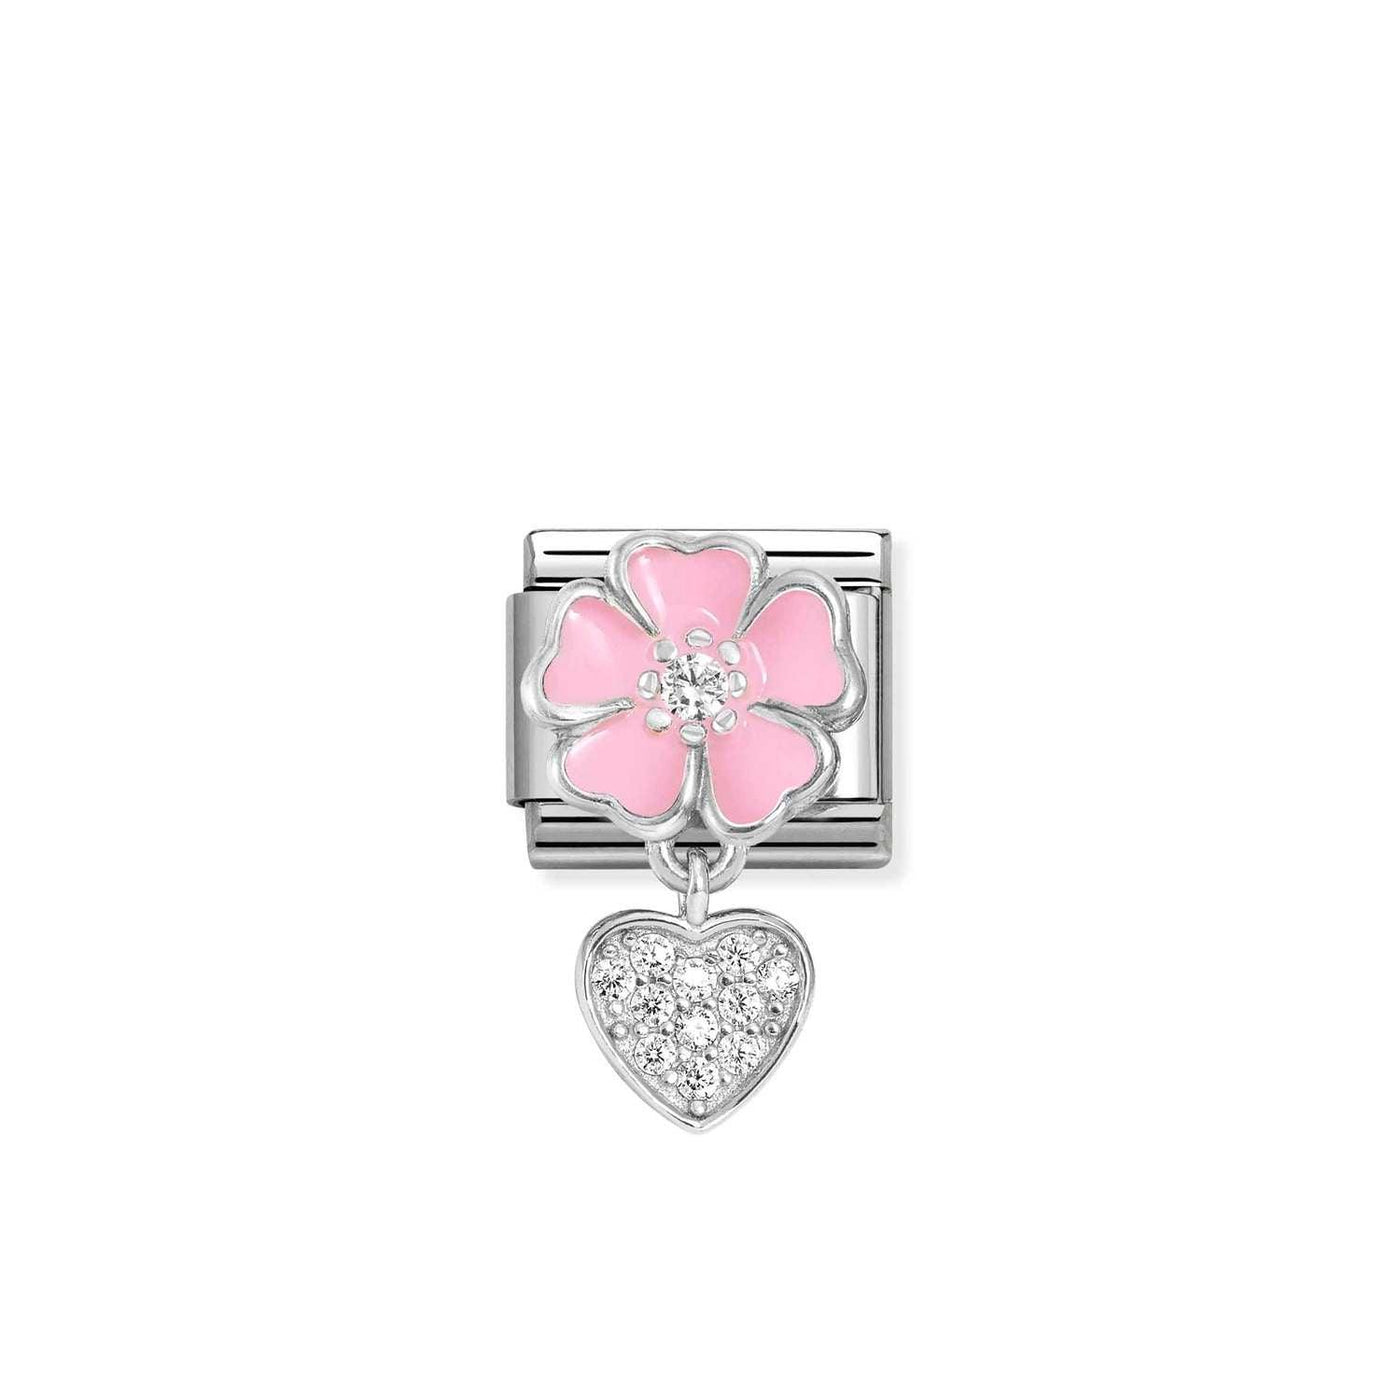 Nomination Classic Silver Pink Peach Blossom Heart Charm